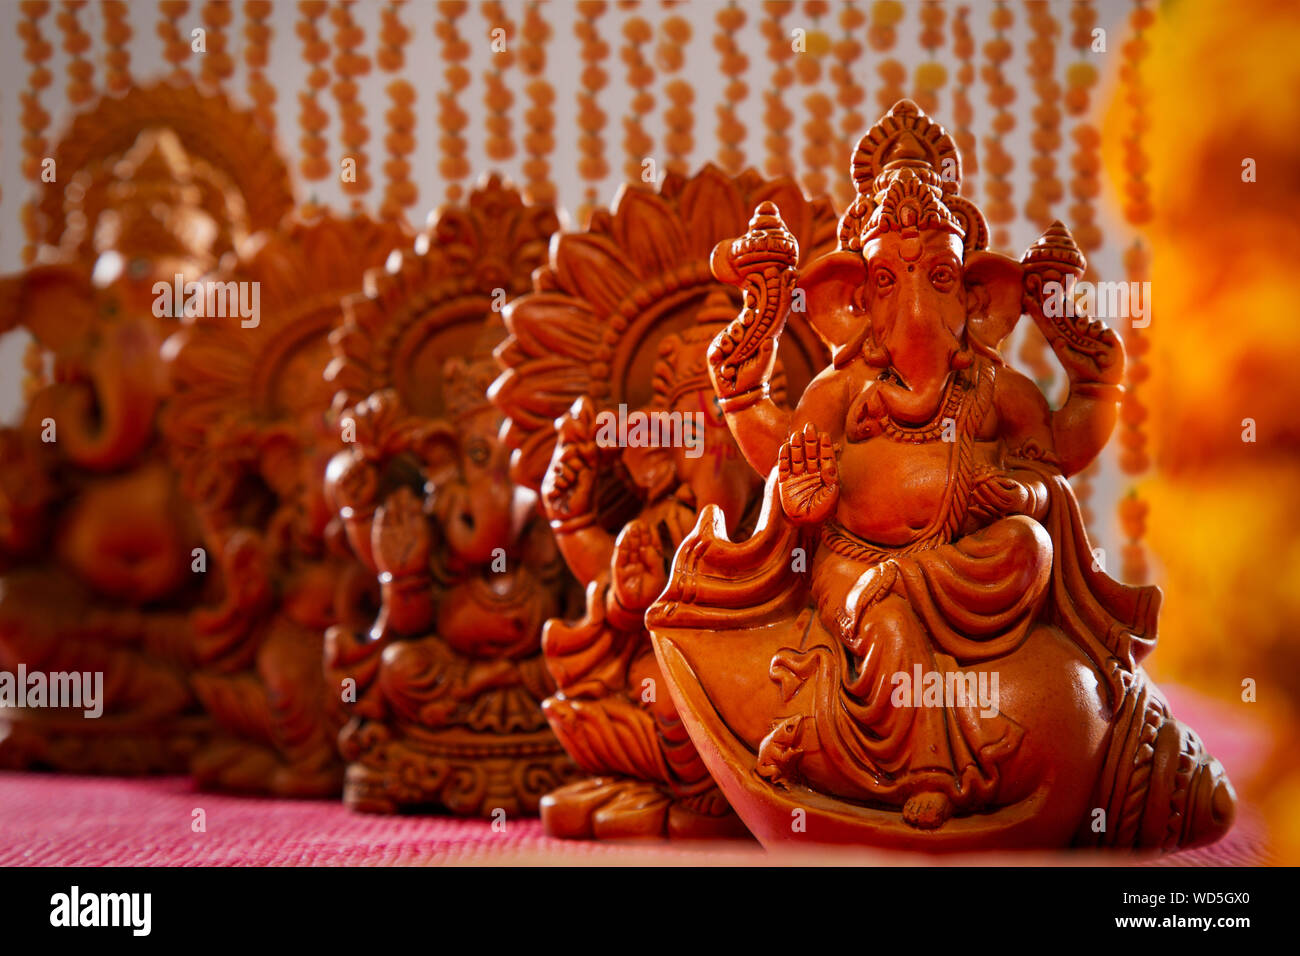 different types of ganesh idols kept on a table Stock Photo - Alamy